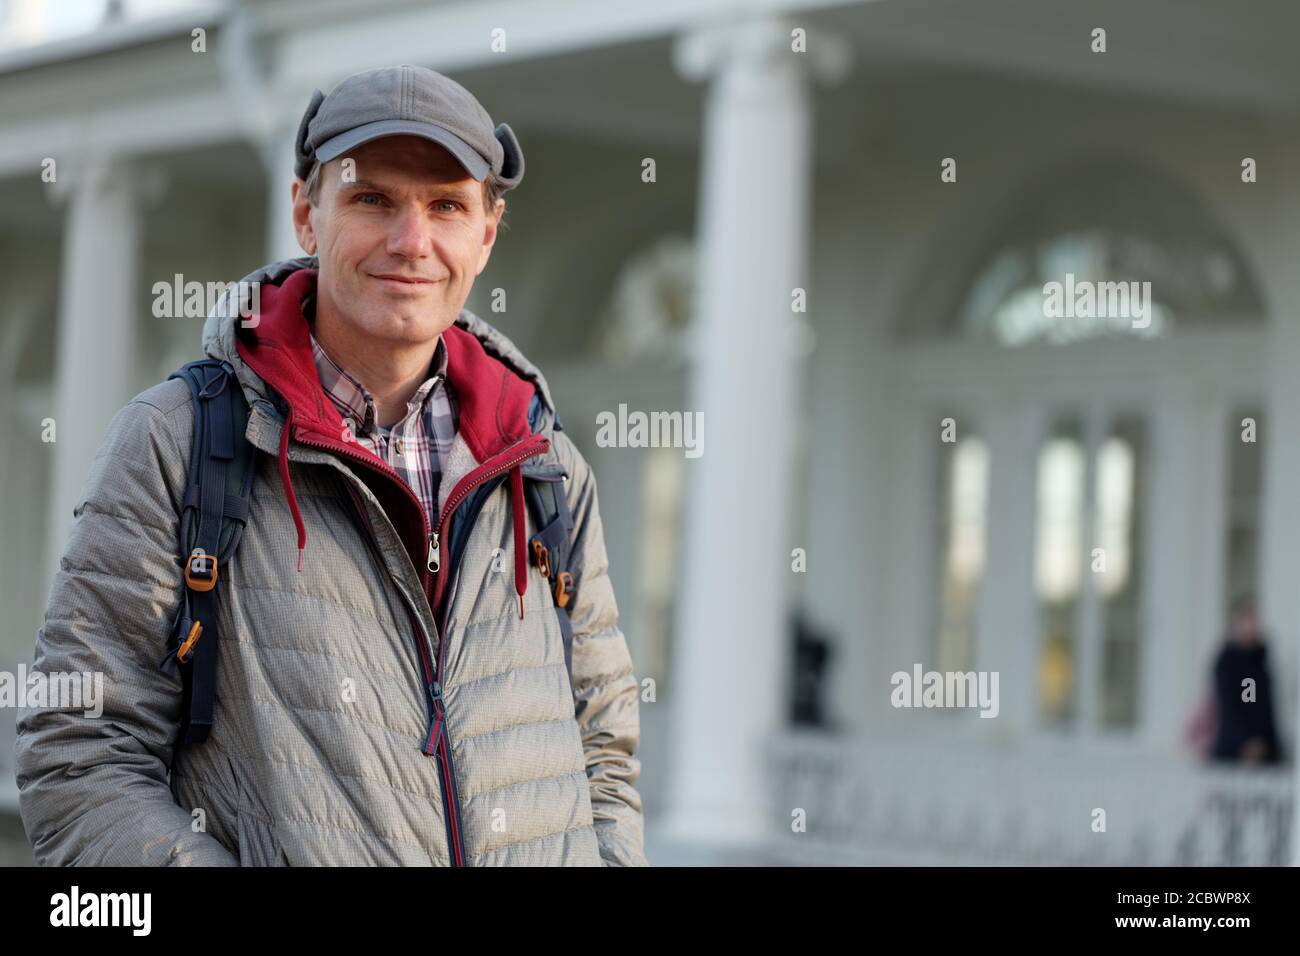 Smiling mature Caucasian man standing with backpack against a pavilion in a city garden Stock Photo